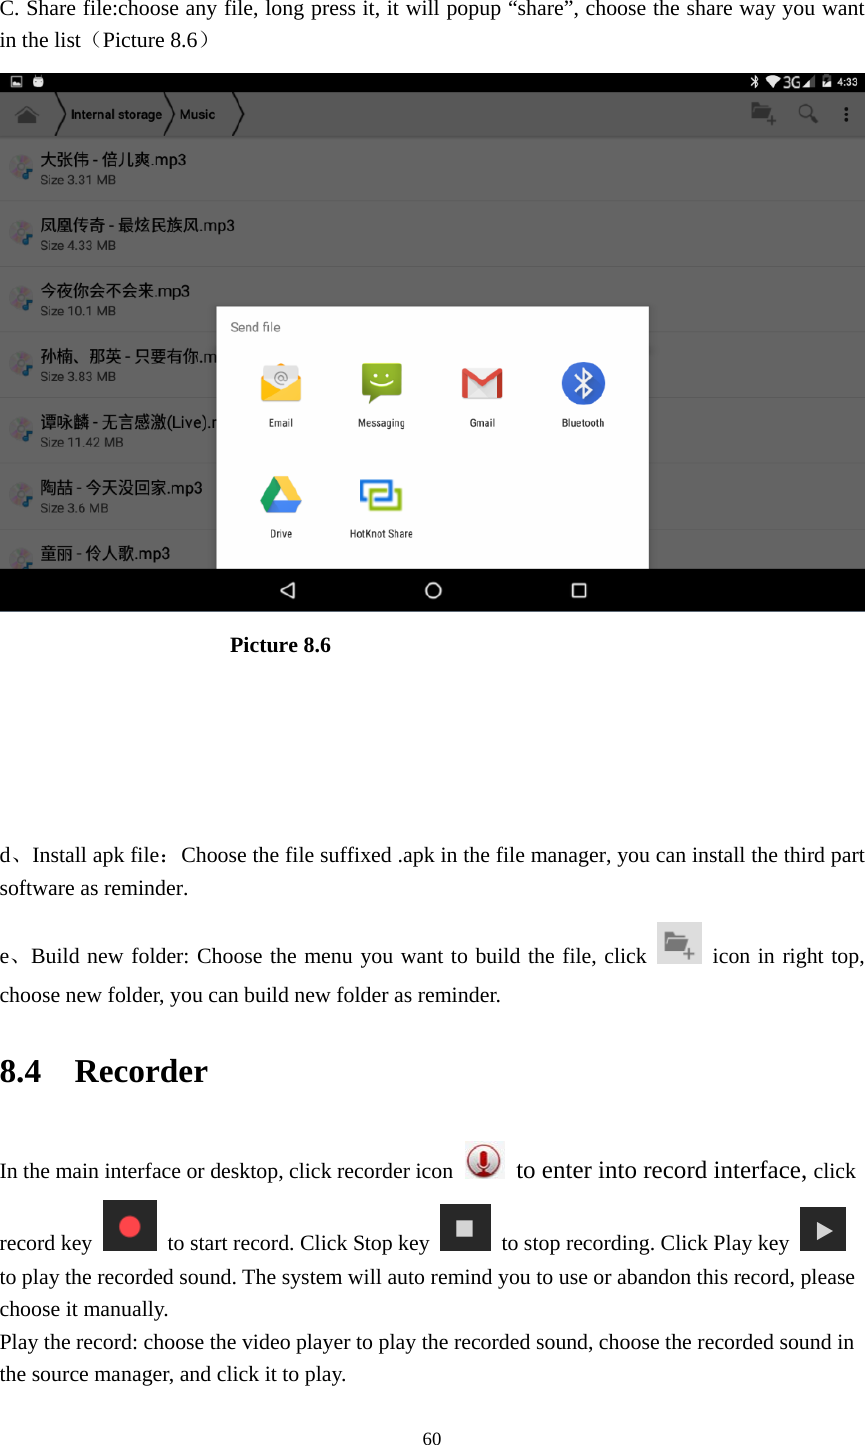     60 C. Share file:choose any file, long press it, it will popup “share”, choose the share way you want in the list（Picture 8.6）                       Picture 8.6     d、Install apk file：Choose the file suffixed .apk in the file manager, you can install the third part software as reminder. e、Build new folder: Choose the menu you want to build the file, click   icon in right top, choose new folder, you can build new folder as reminder. 8.4  Recorder In the main interface or desktop, click recorder icon   to enter into record interface, click record key    to start record. Click Stop key    to stop recording. Click Play key   to play the recorded sound. The system will auto remind you to use or abandon this record, please choose it manually. Play the record: choose the video player to play the recorded sound, choose the recorded sound in the source manager, and click it to play.   